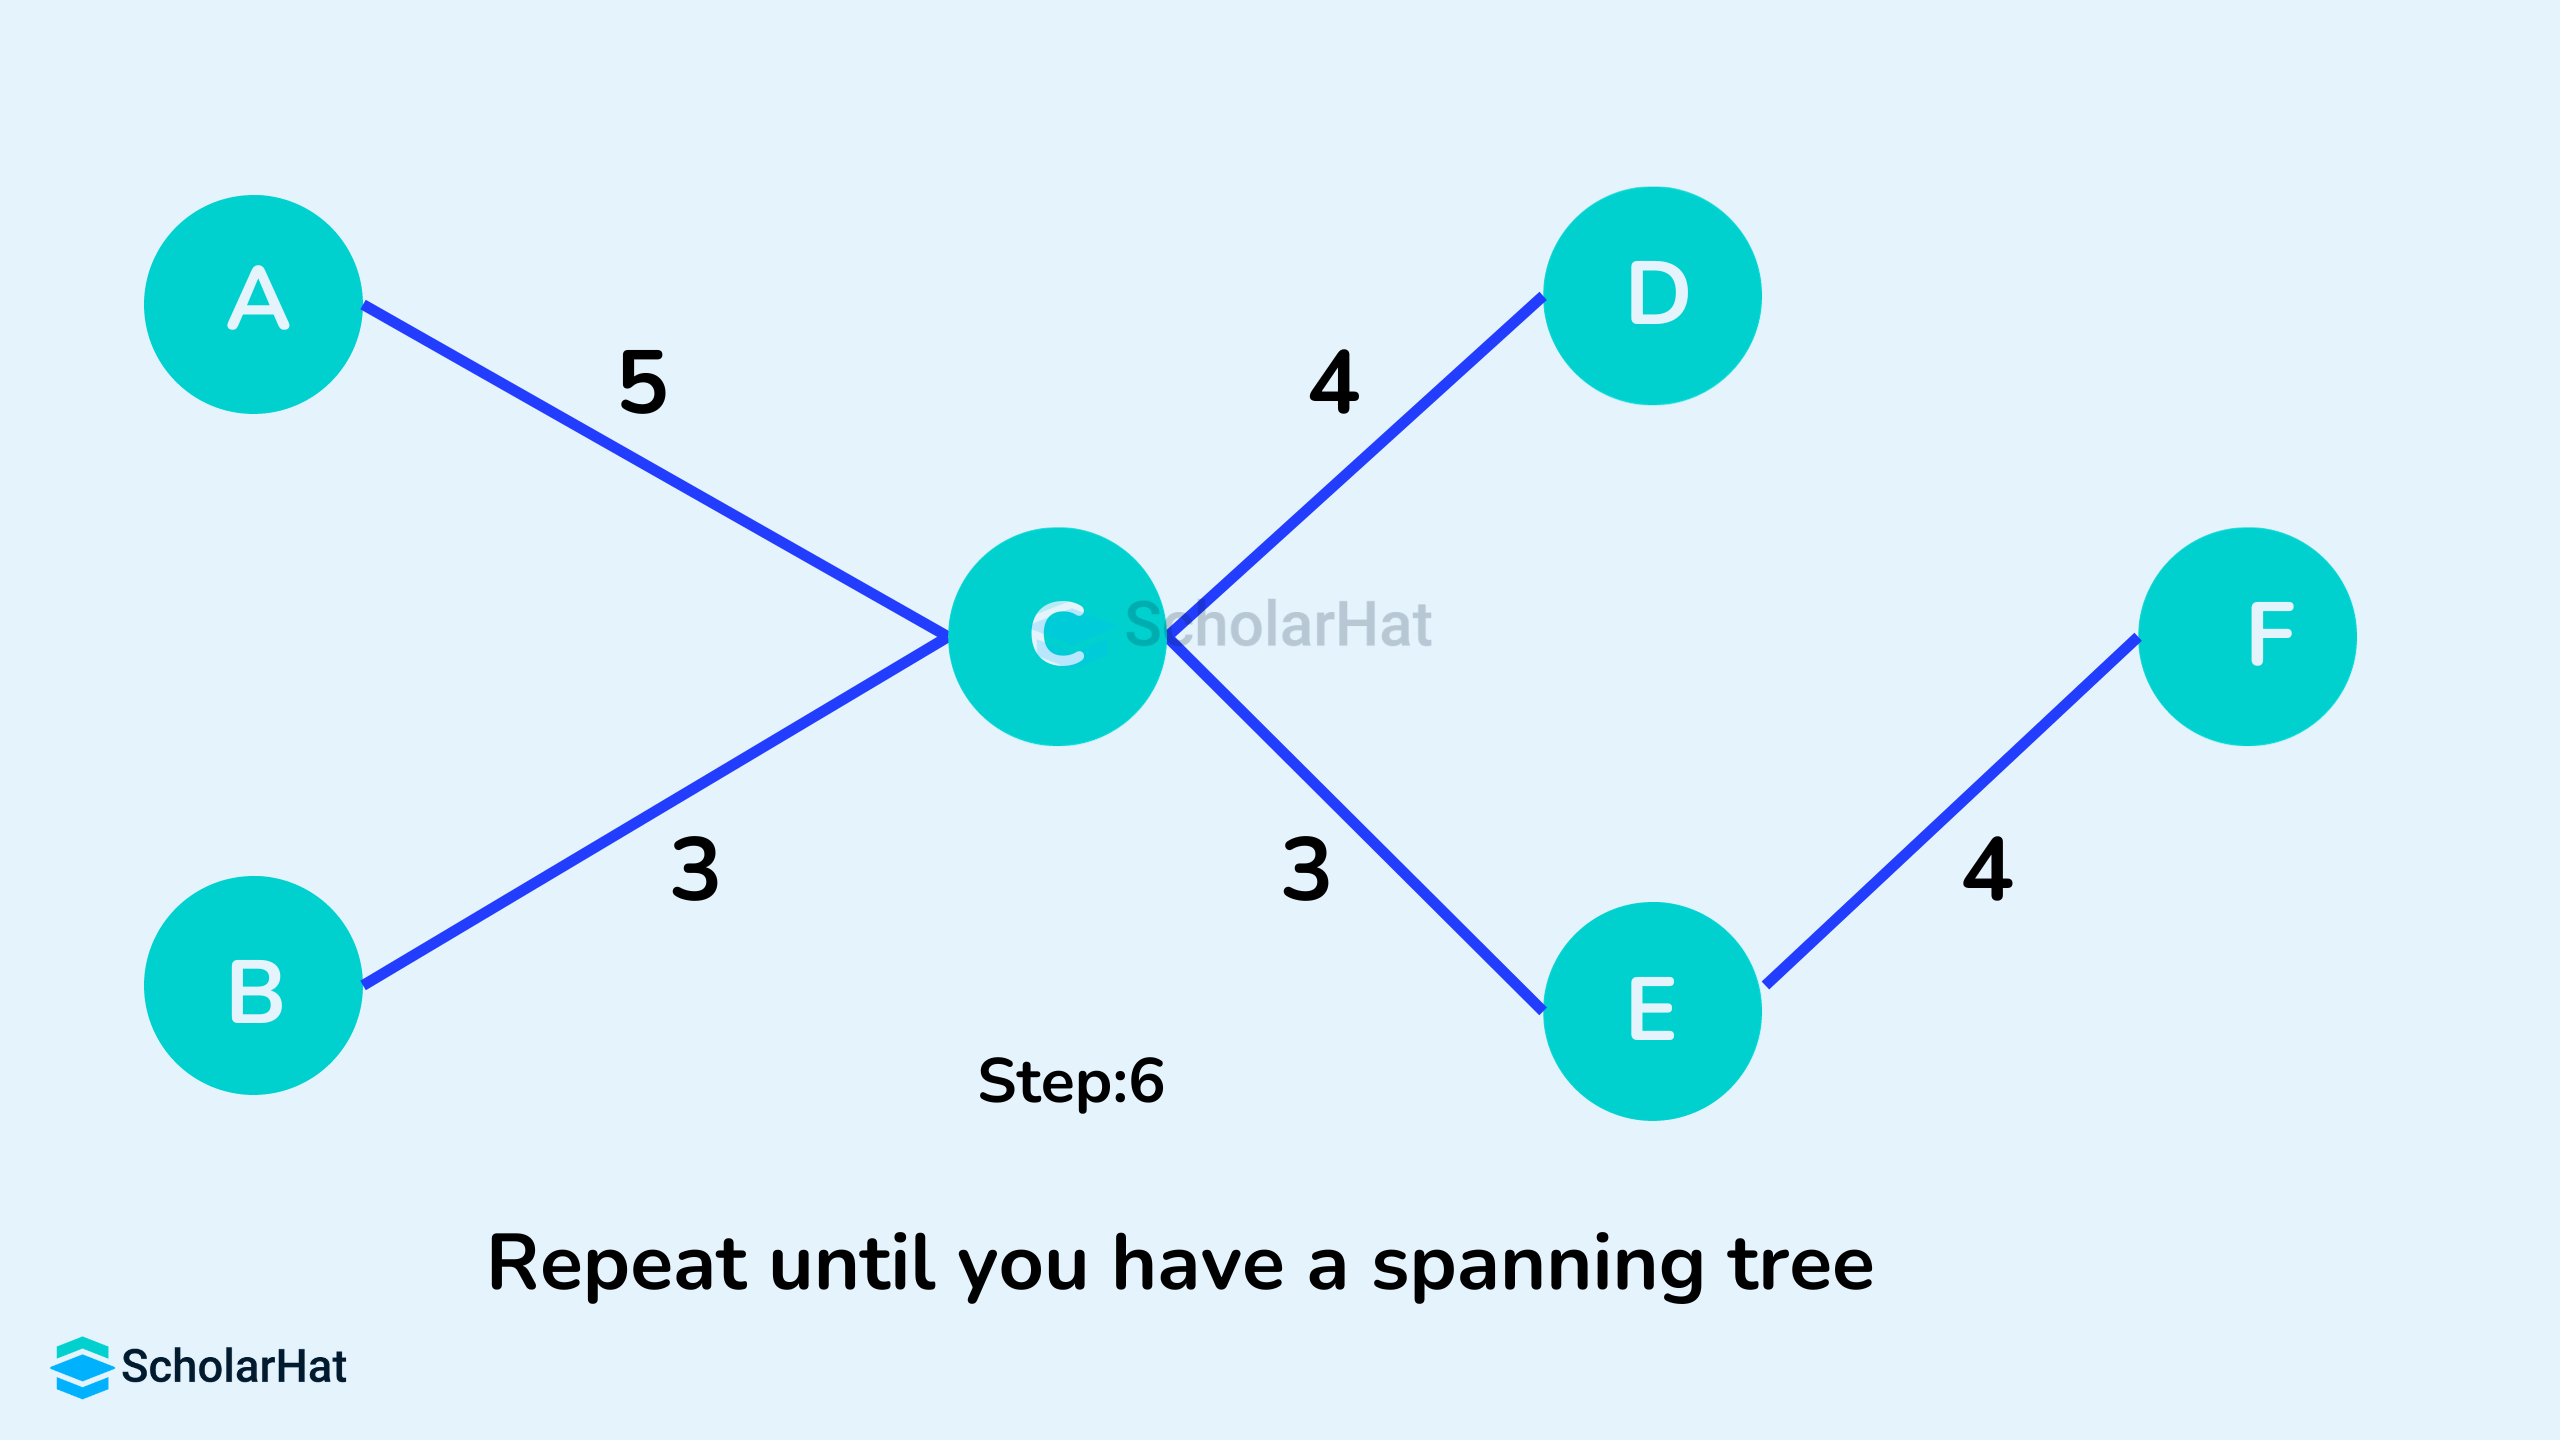 Repeat until you have a spanning tree